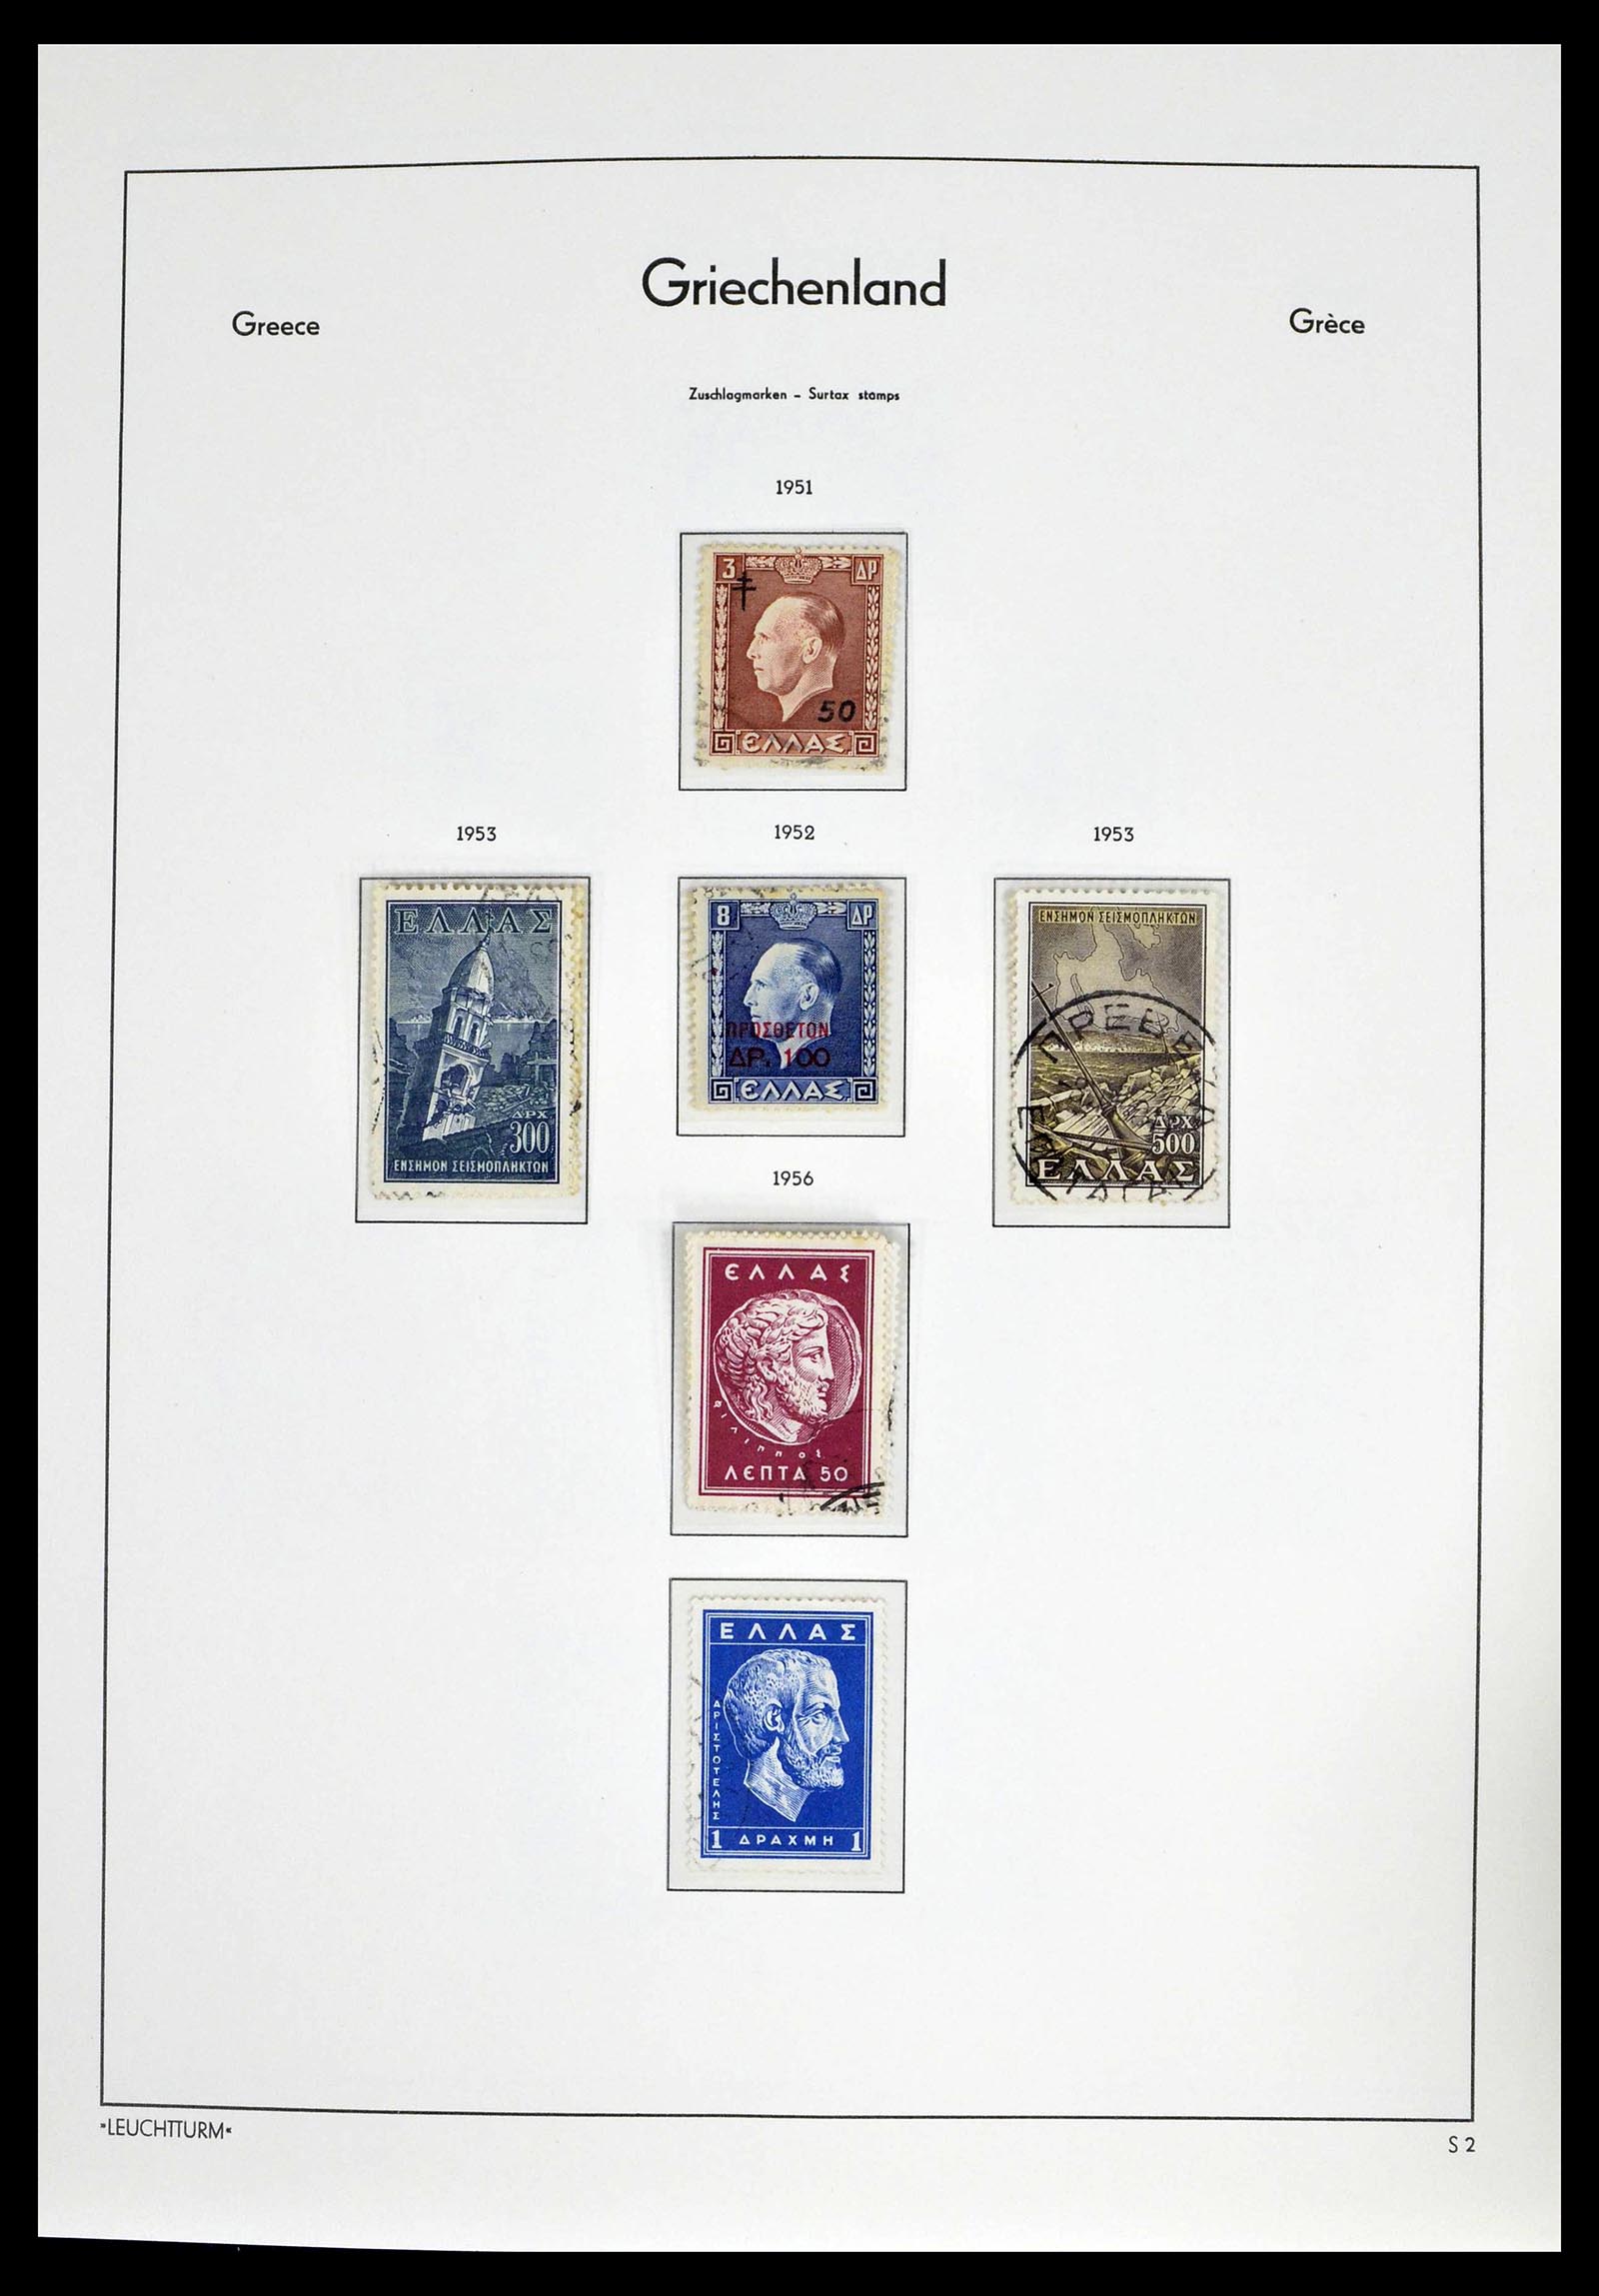 39243 0060 - Stamp collection 39243 Greece 1861-1965.